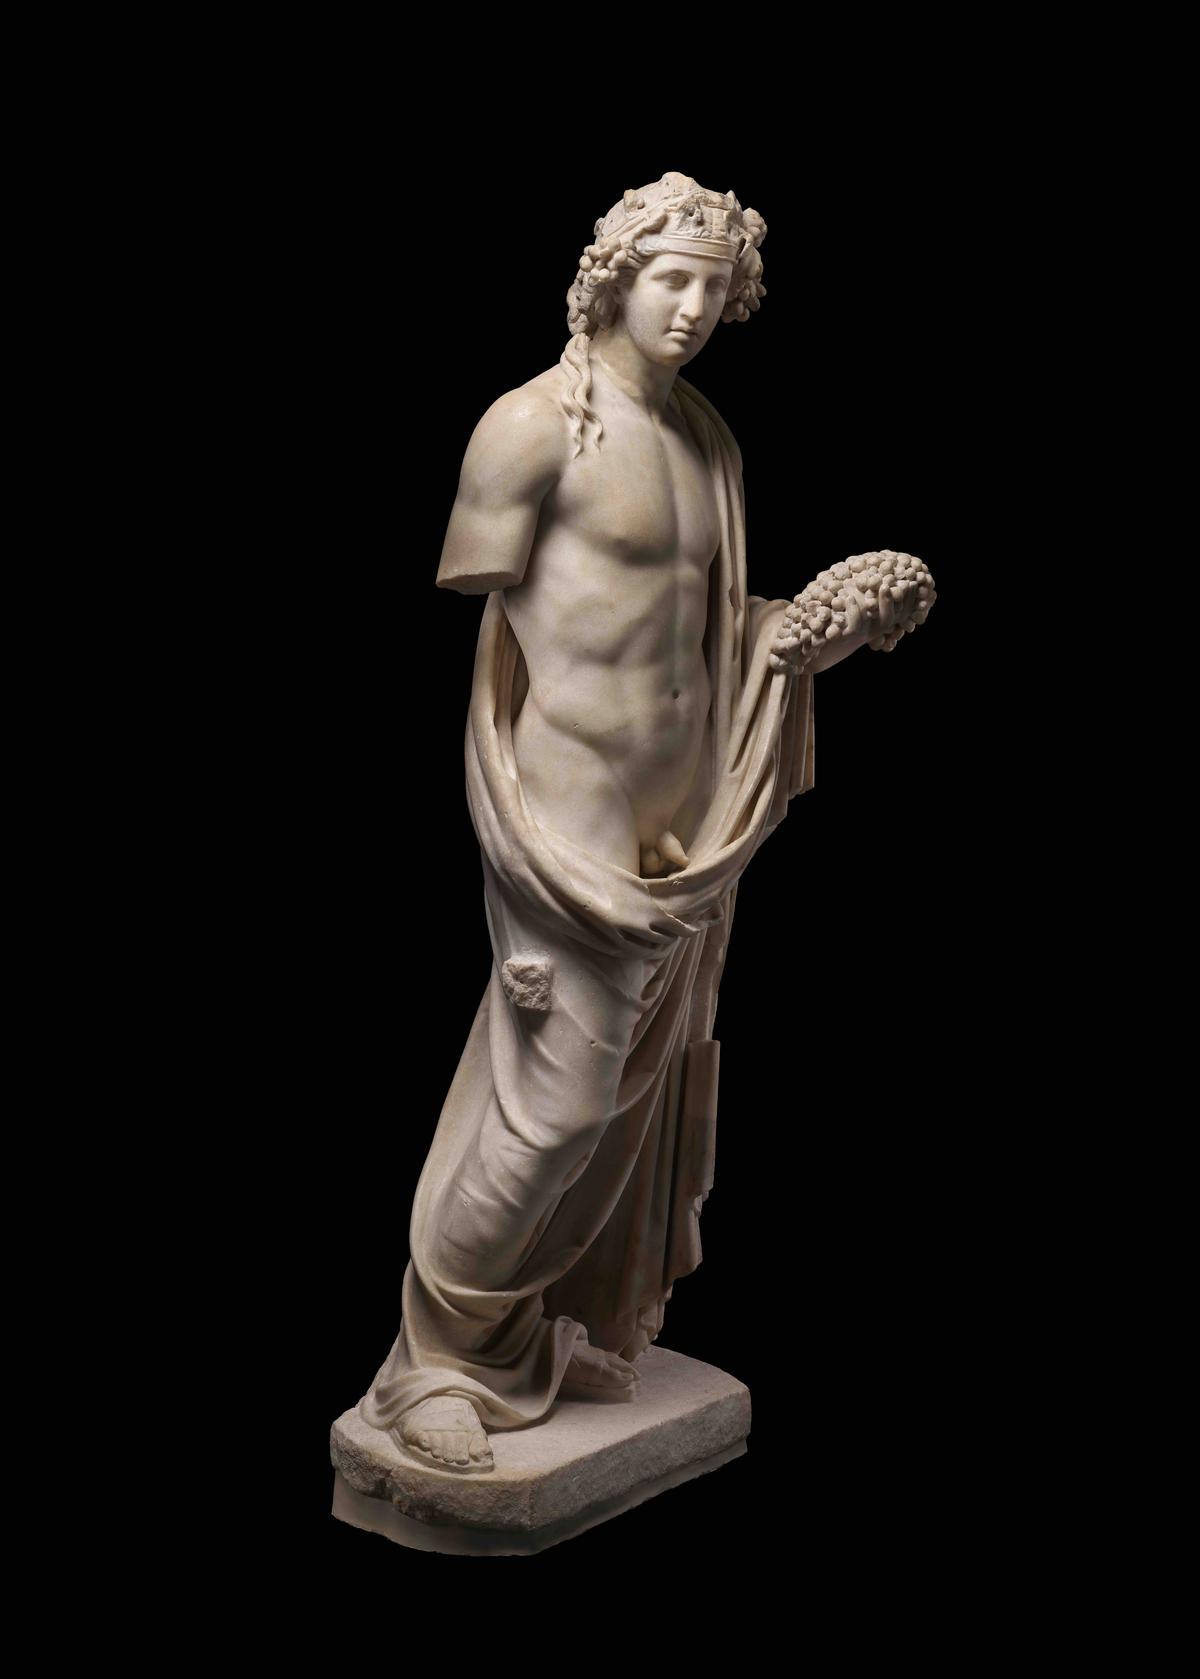 ‘Dionysos’ or ‘Bacchus’ in marble (100–199 CE), from The British Museum.